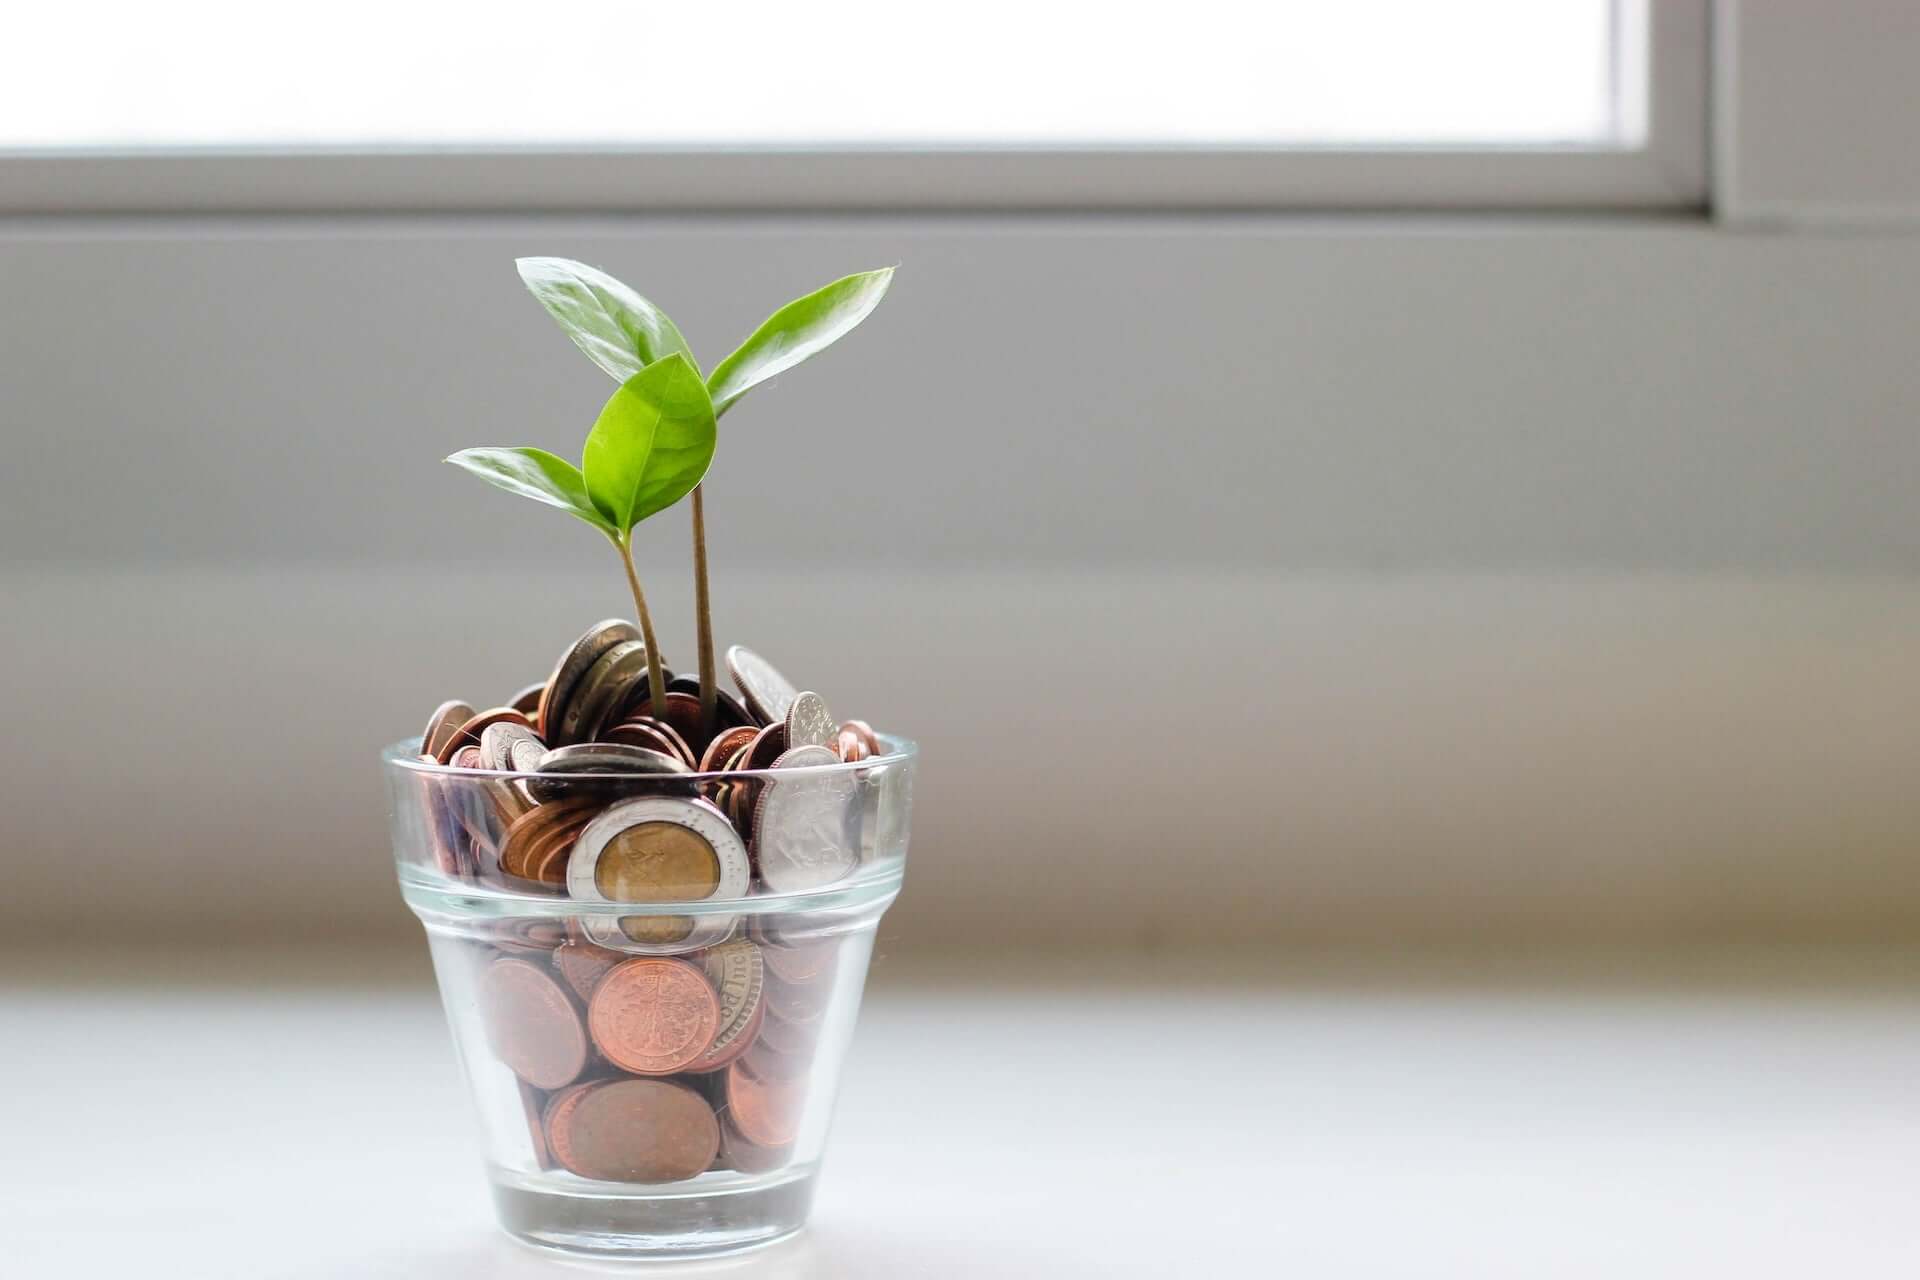 A small plant in a glass pot full of American coins.